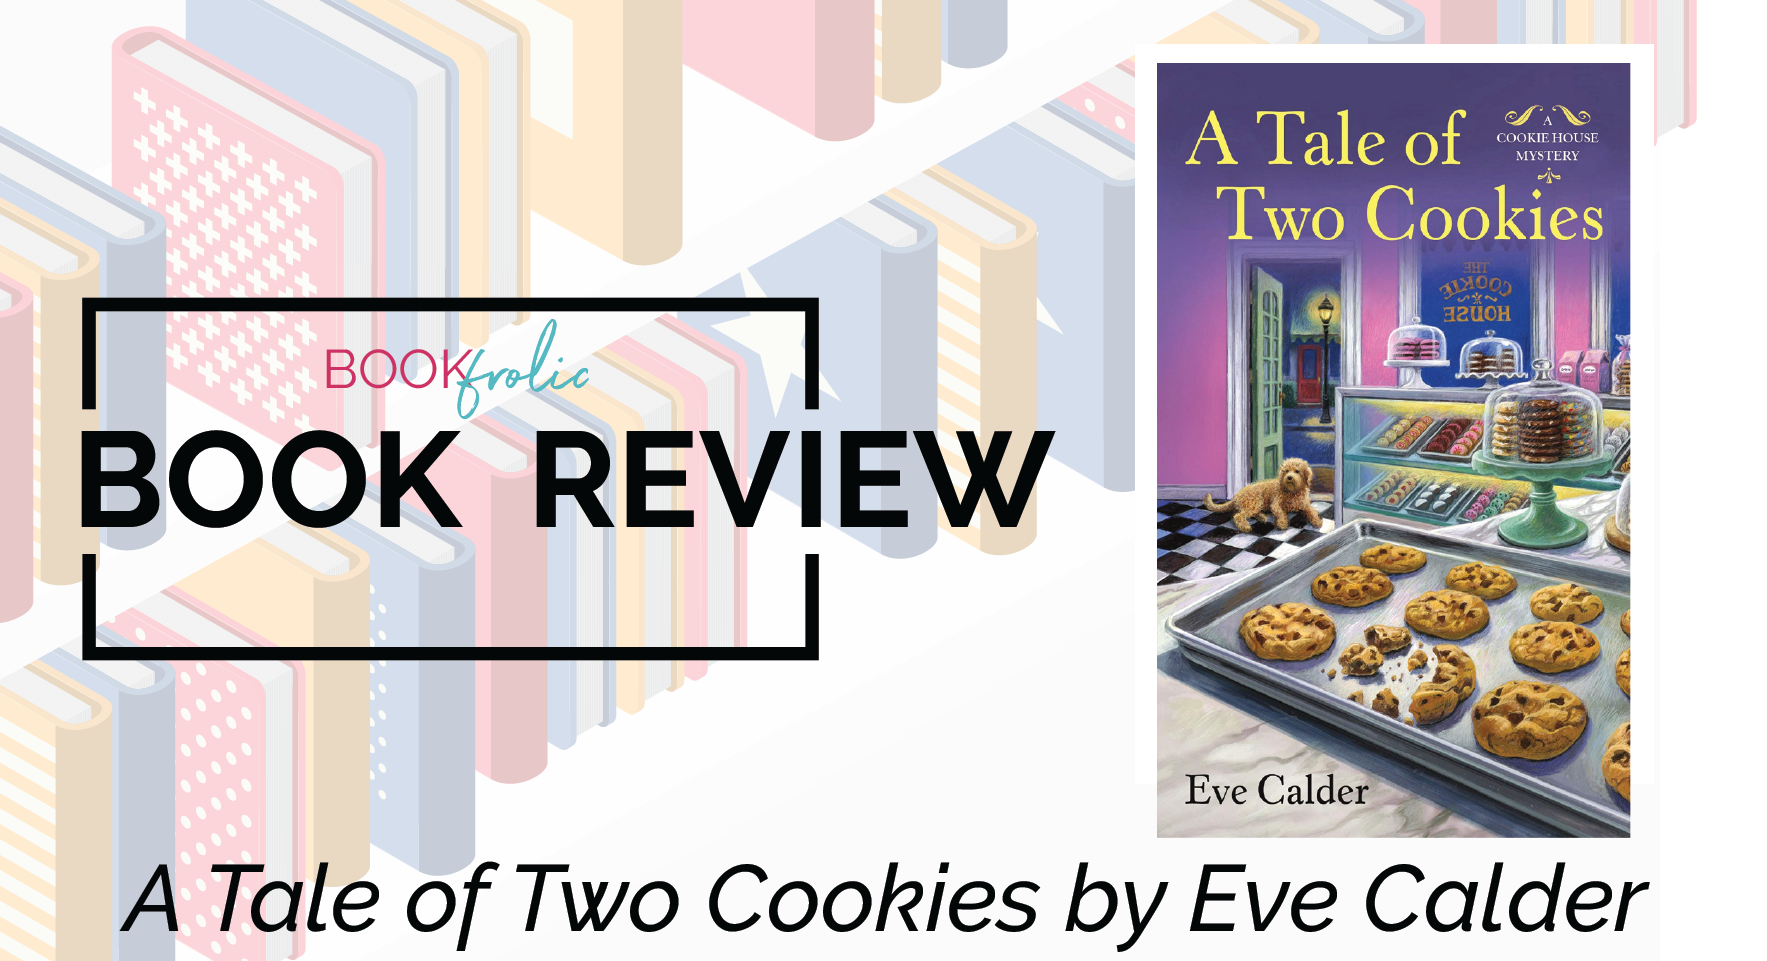 review of A Tale of Two Cookies by Eve Calder